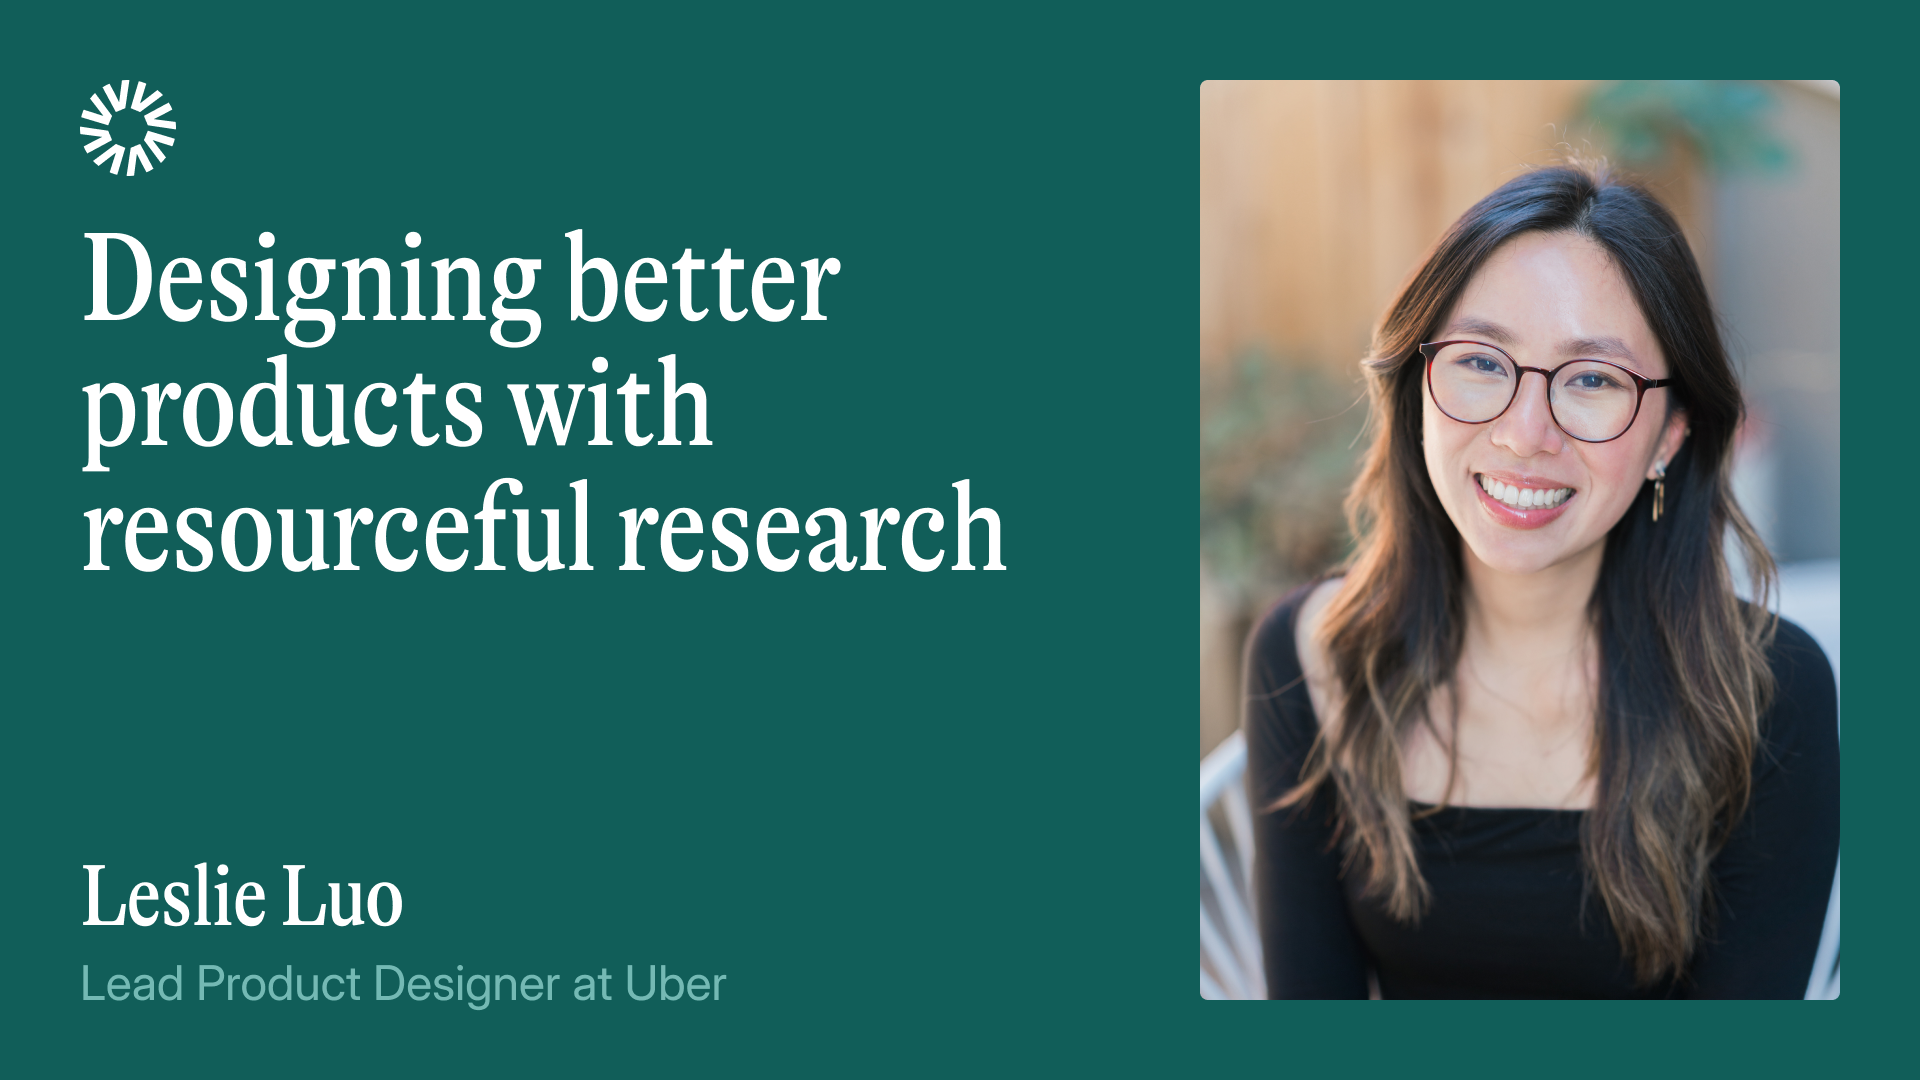 Designing better products with resourceful research